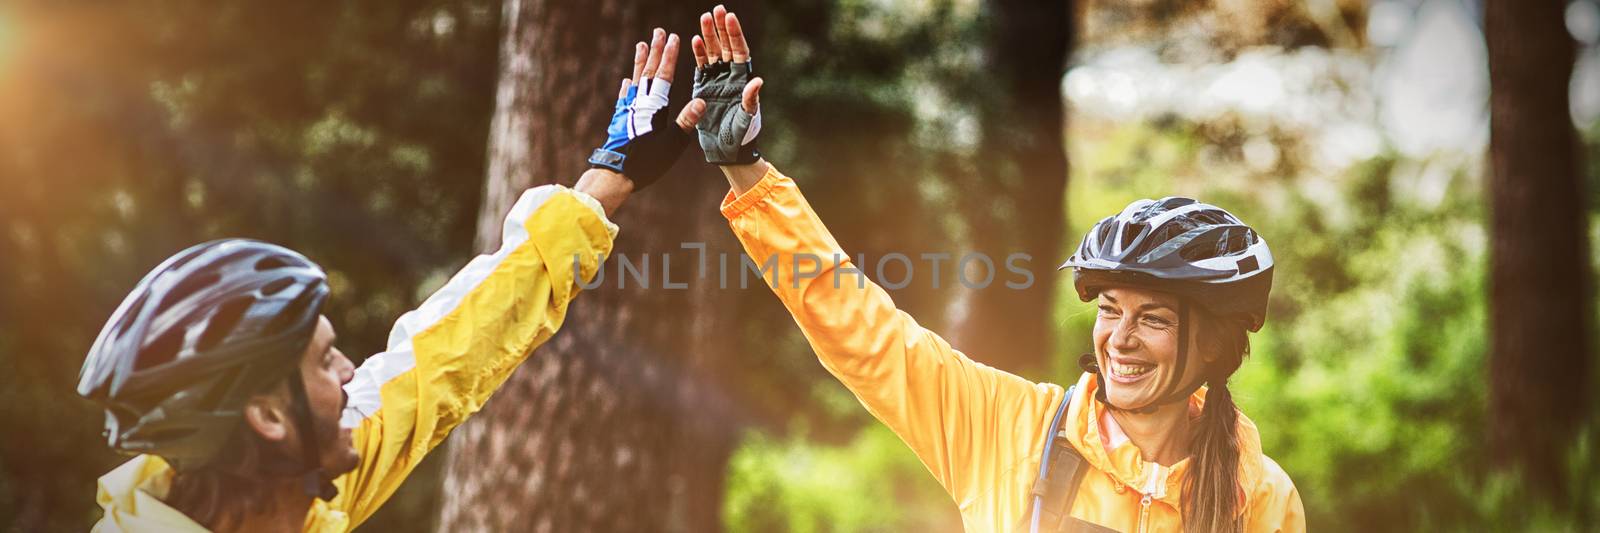 Happy biker couple giving high five each other in countryside